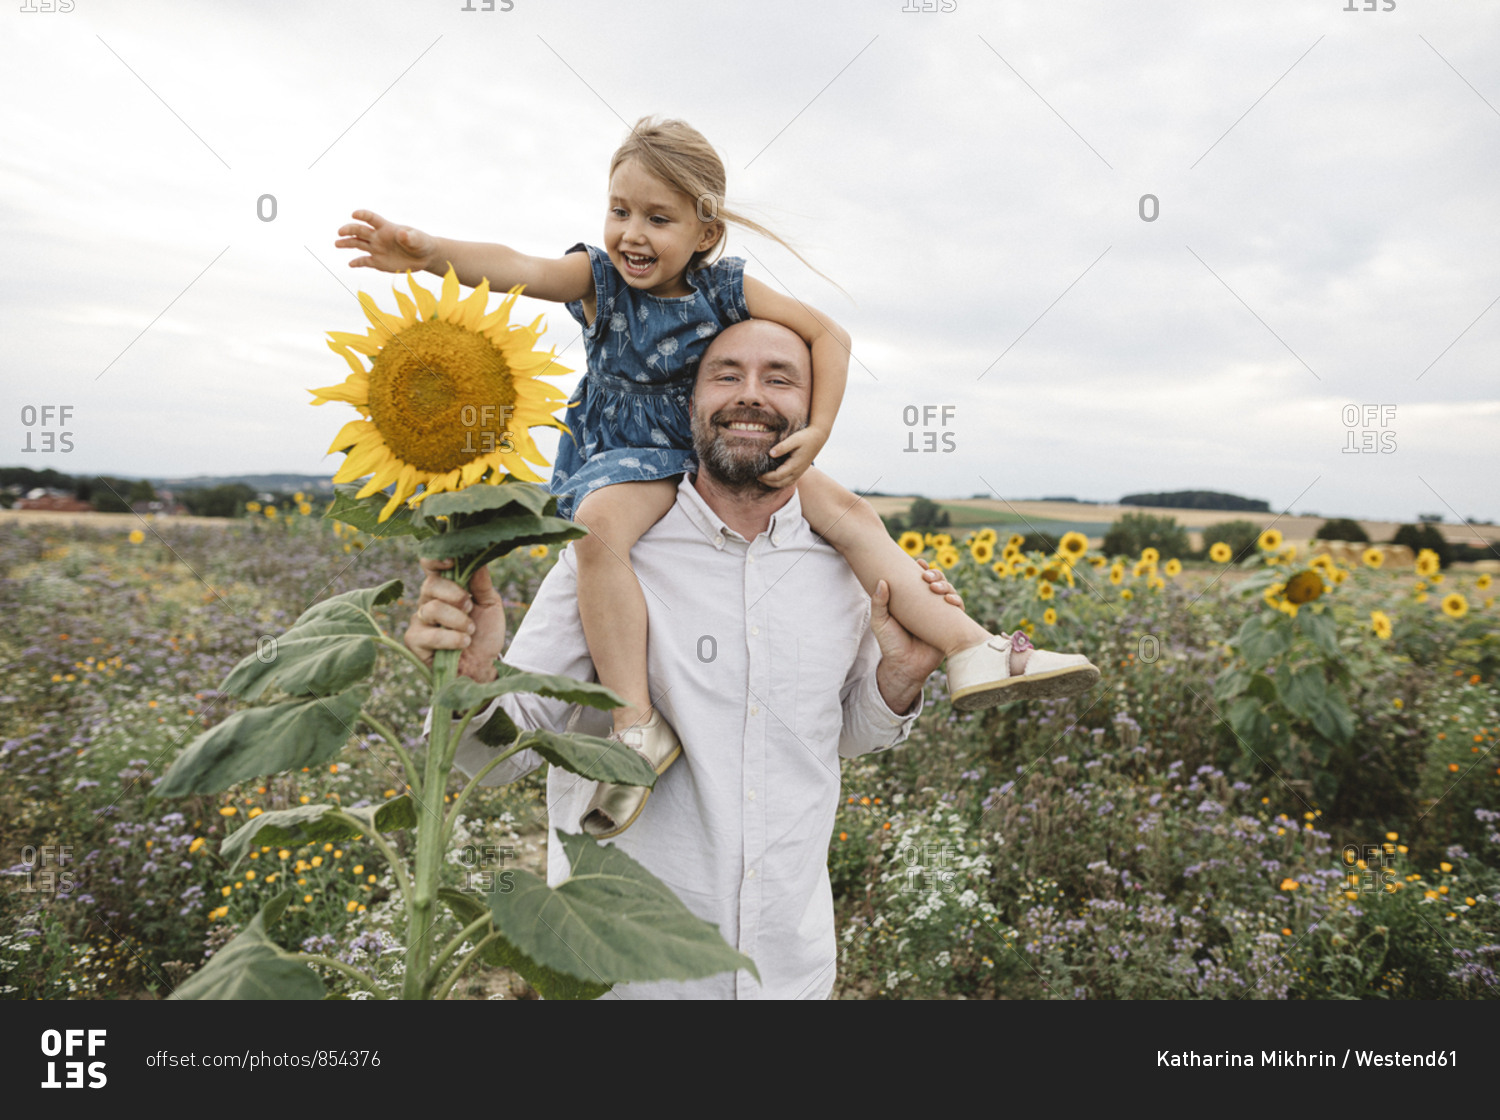 Happy man carrying daughter in a sunflower field